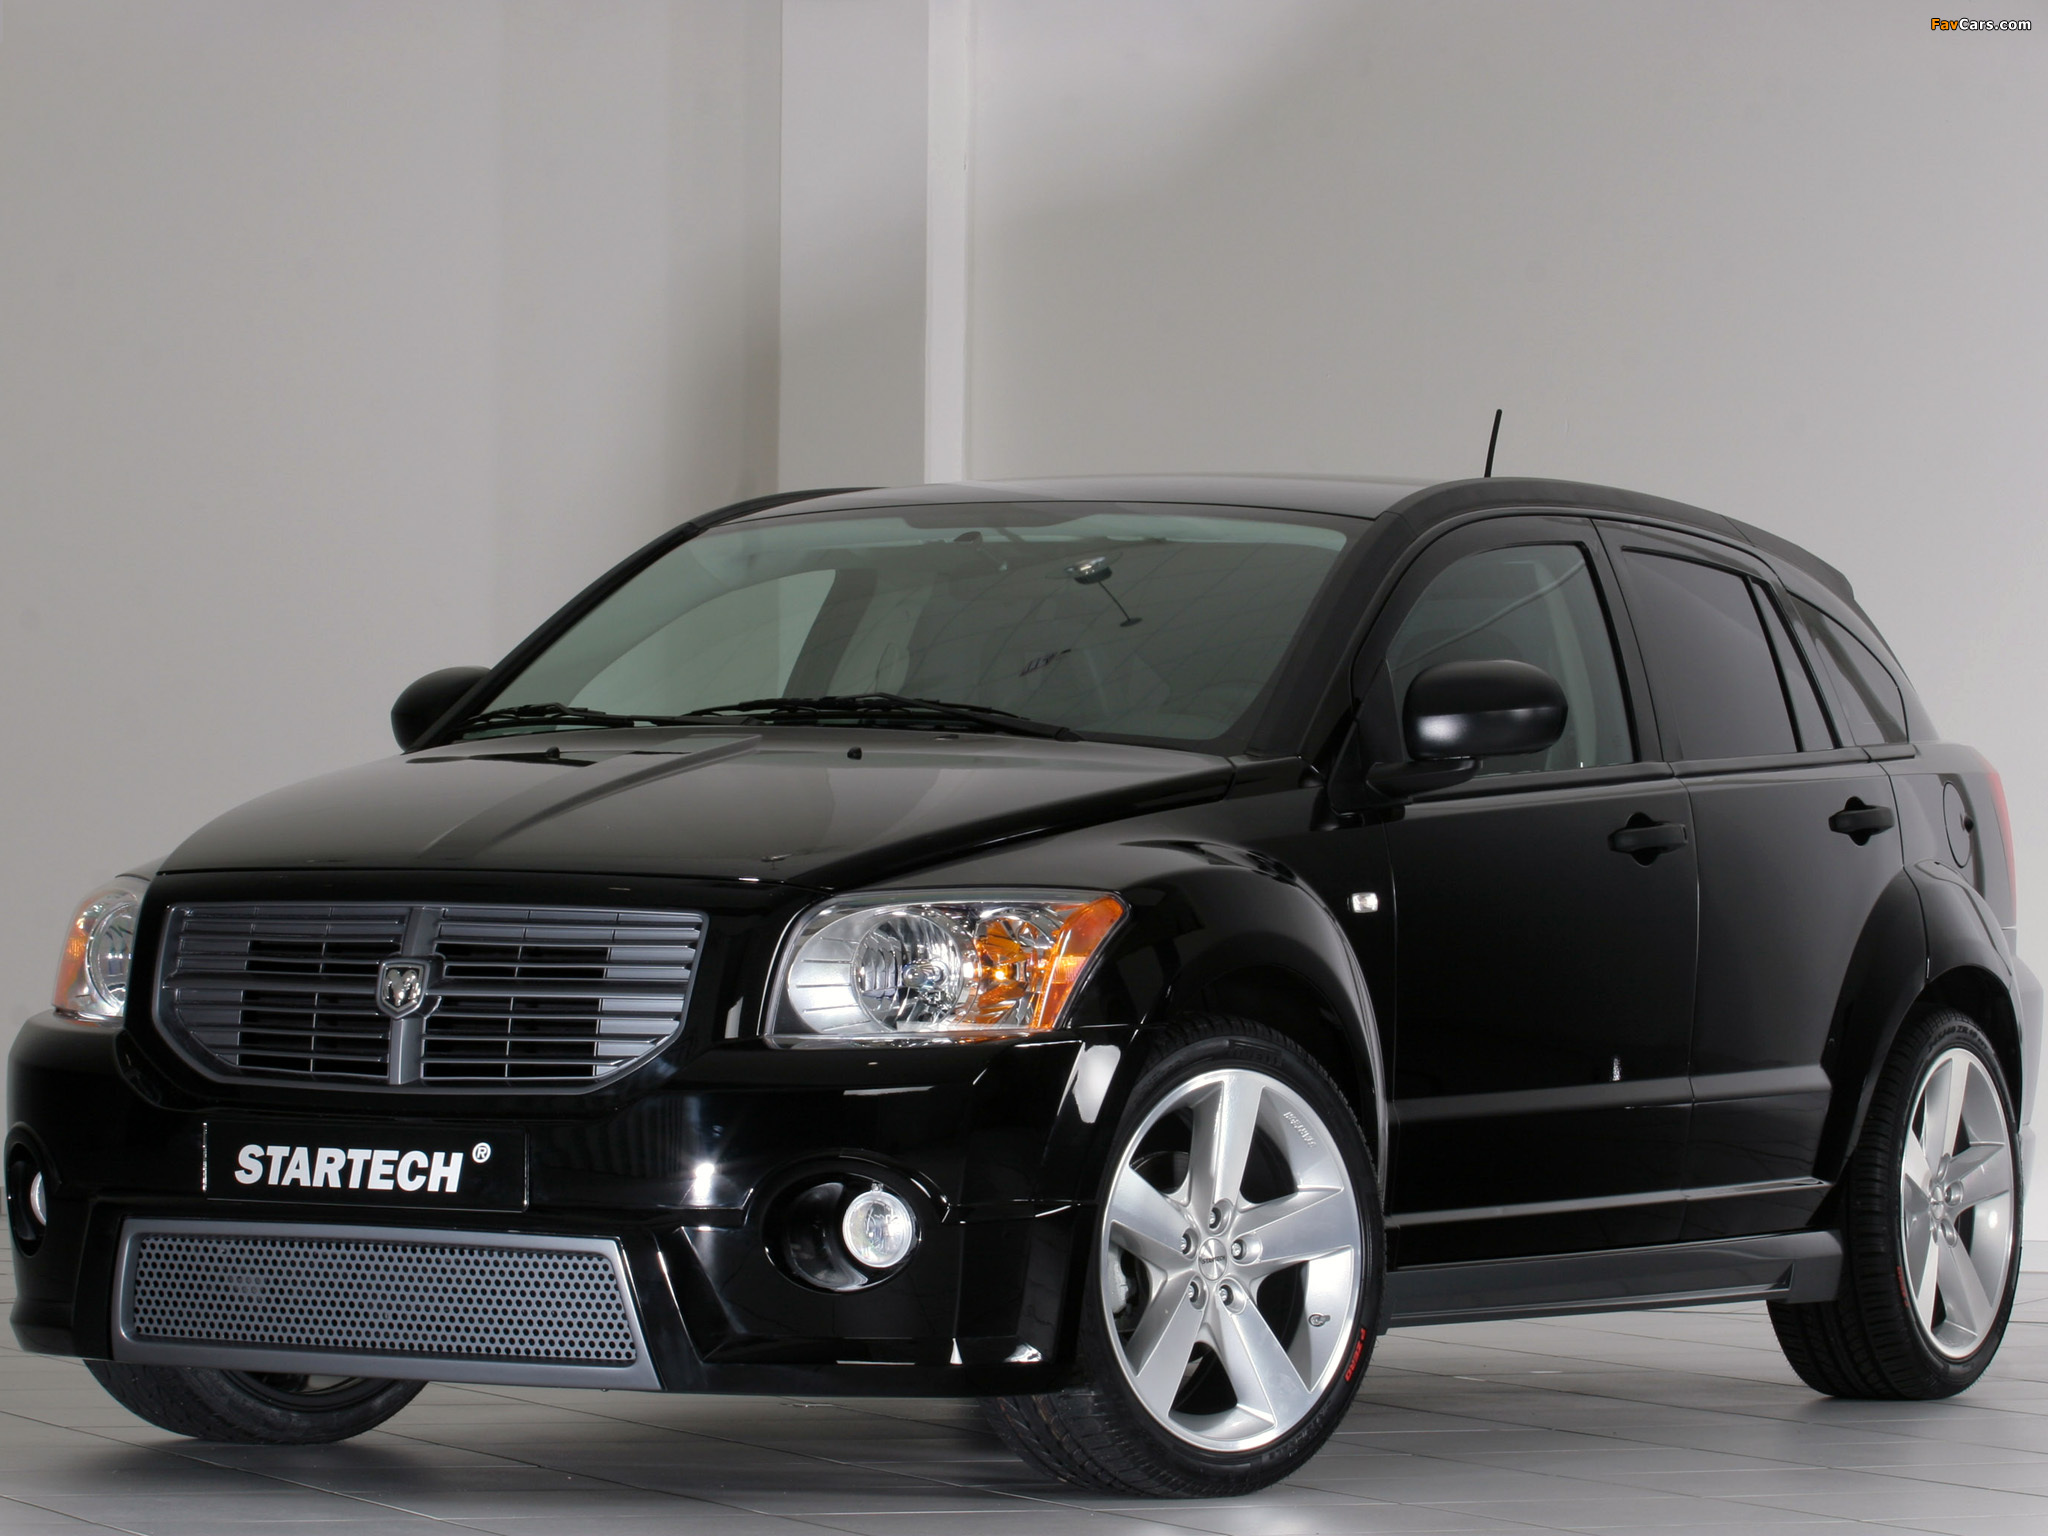 Startech Dodge Caliber 2006 pictures (2048 x 1536)